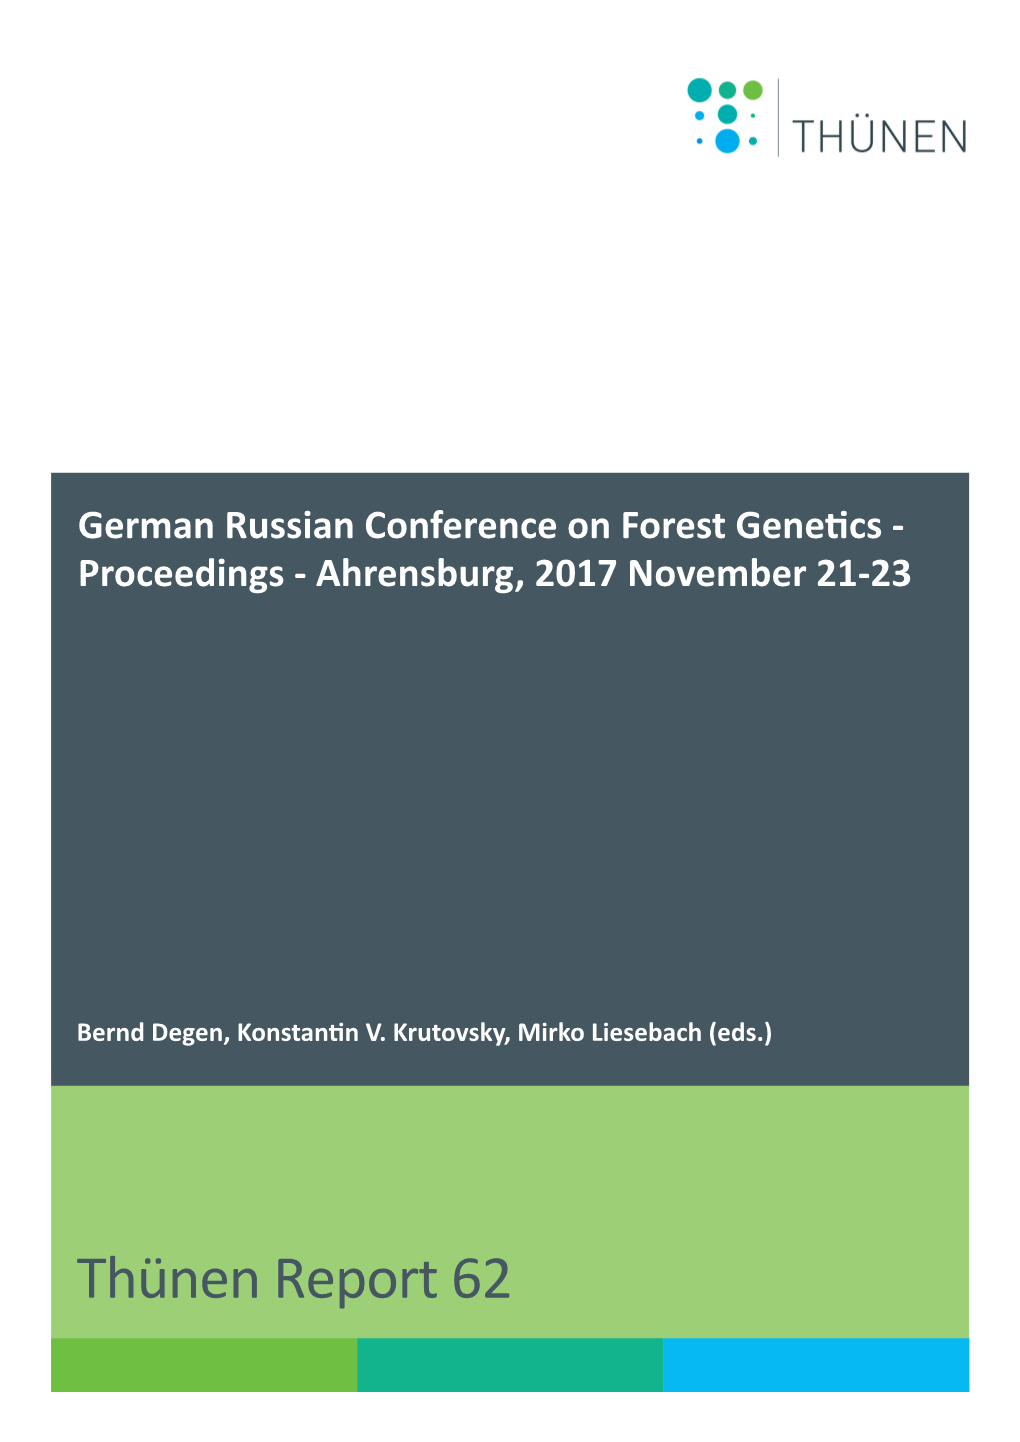 German Russian Conference on Forest Genetics - Proceedings - Ahrensburg, 2017 November 21-23